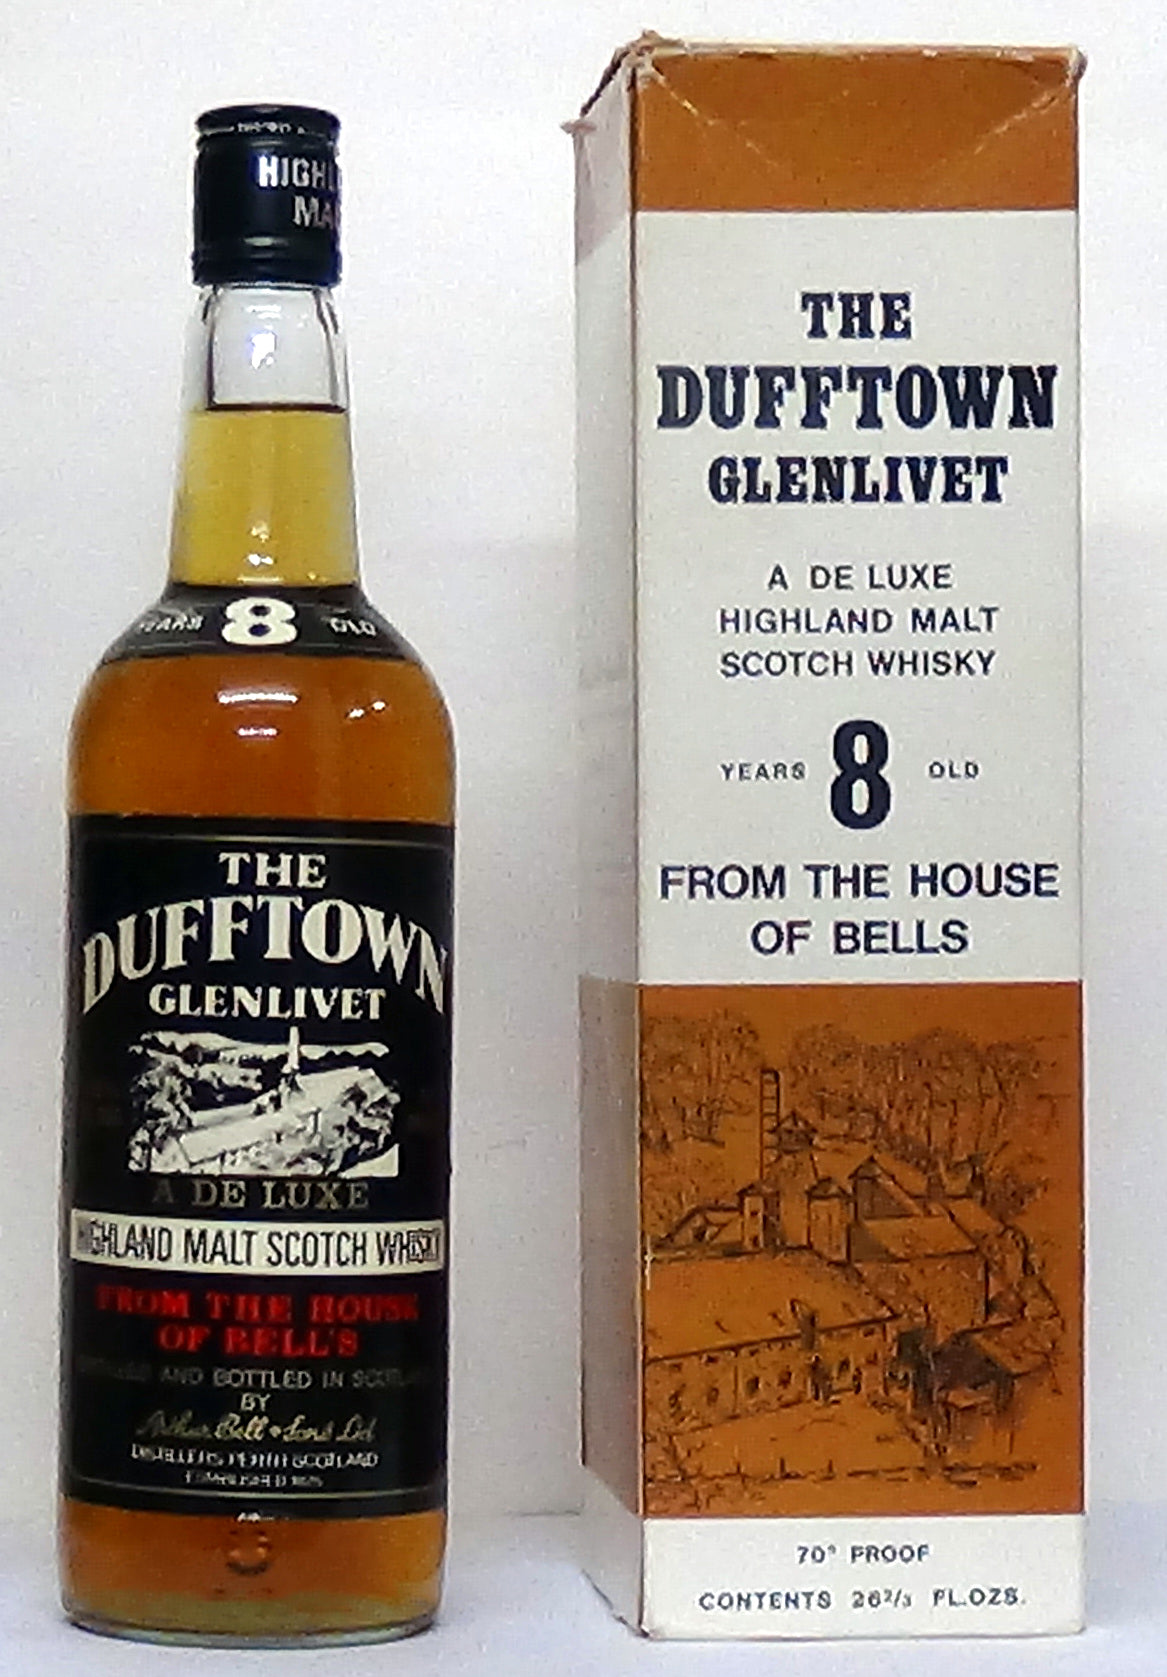 1970s The Dufftown Glenlivet A de Luxe 26 ⅔ Fl.ozs 8 Year Old Highland